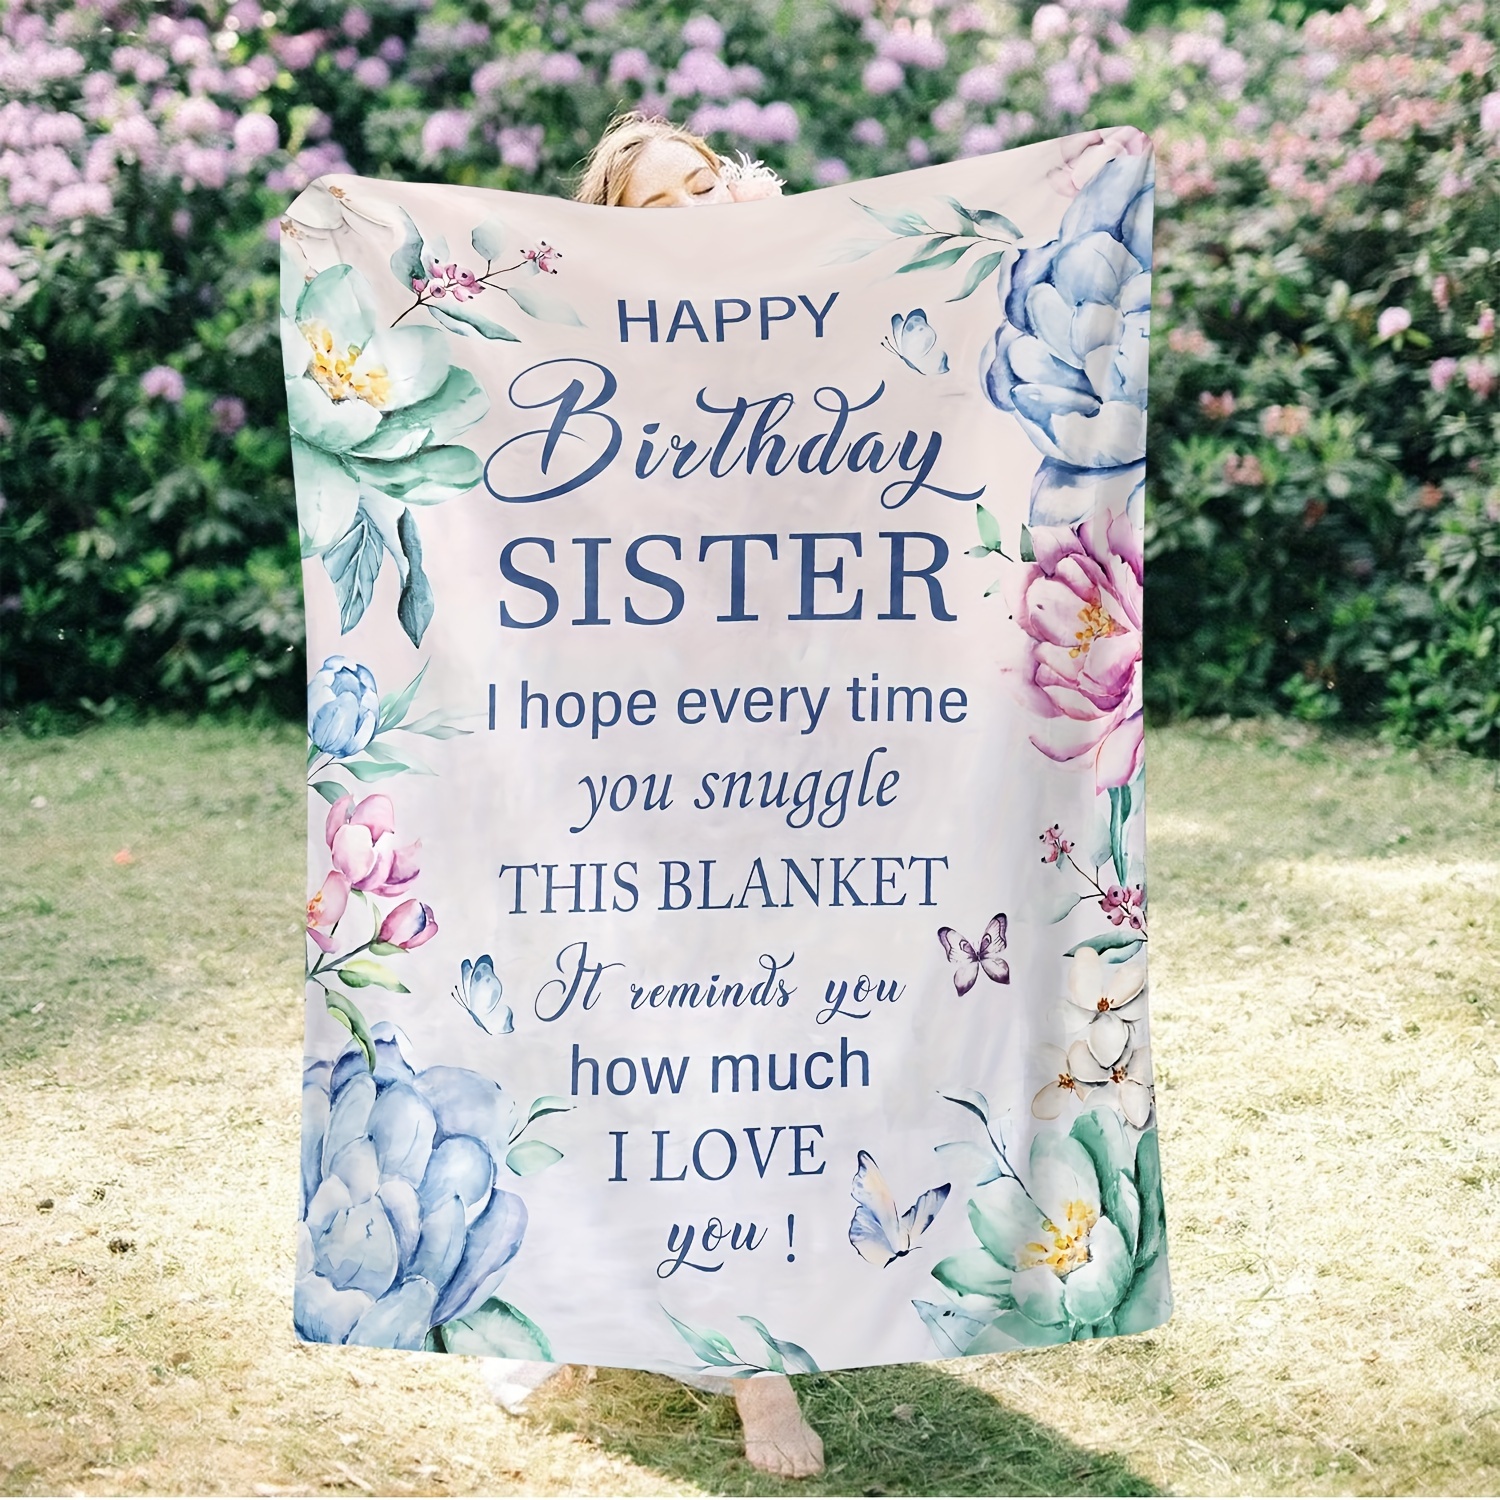 

Happy Birthday Text Pattern Soft Flannel Throw Blanket - Style Sofa & Tv Blanket, Perfect Gift For Sister Or Girlfriend, All-season Knitted Polyester, 200-250g, Digital Print - 1pc